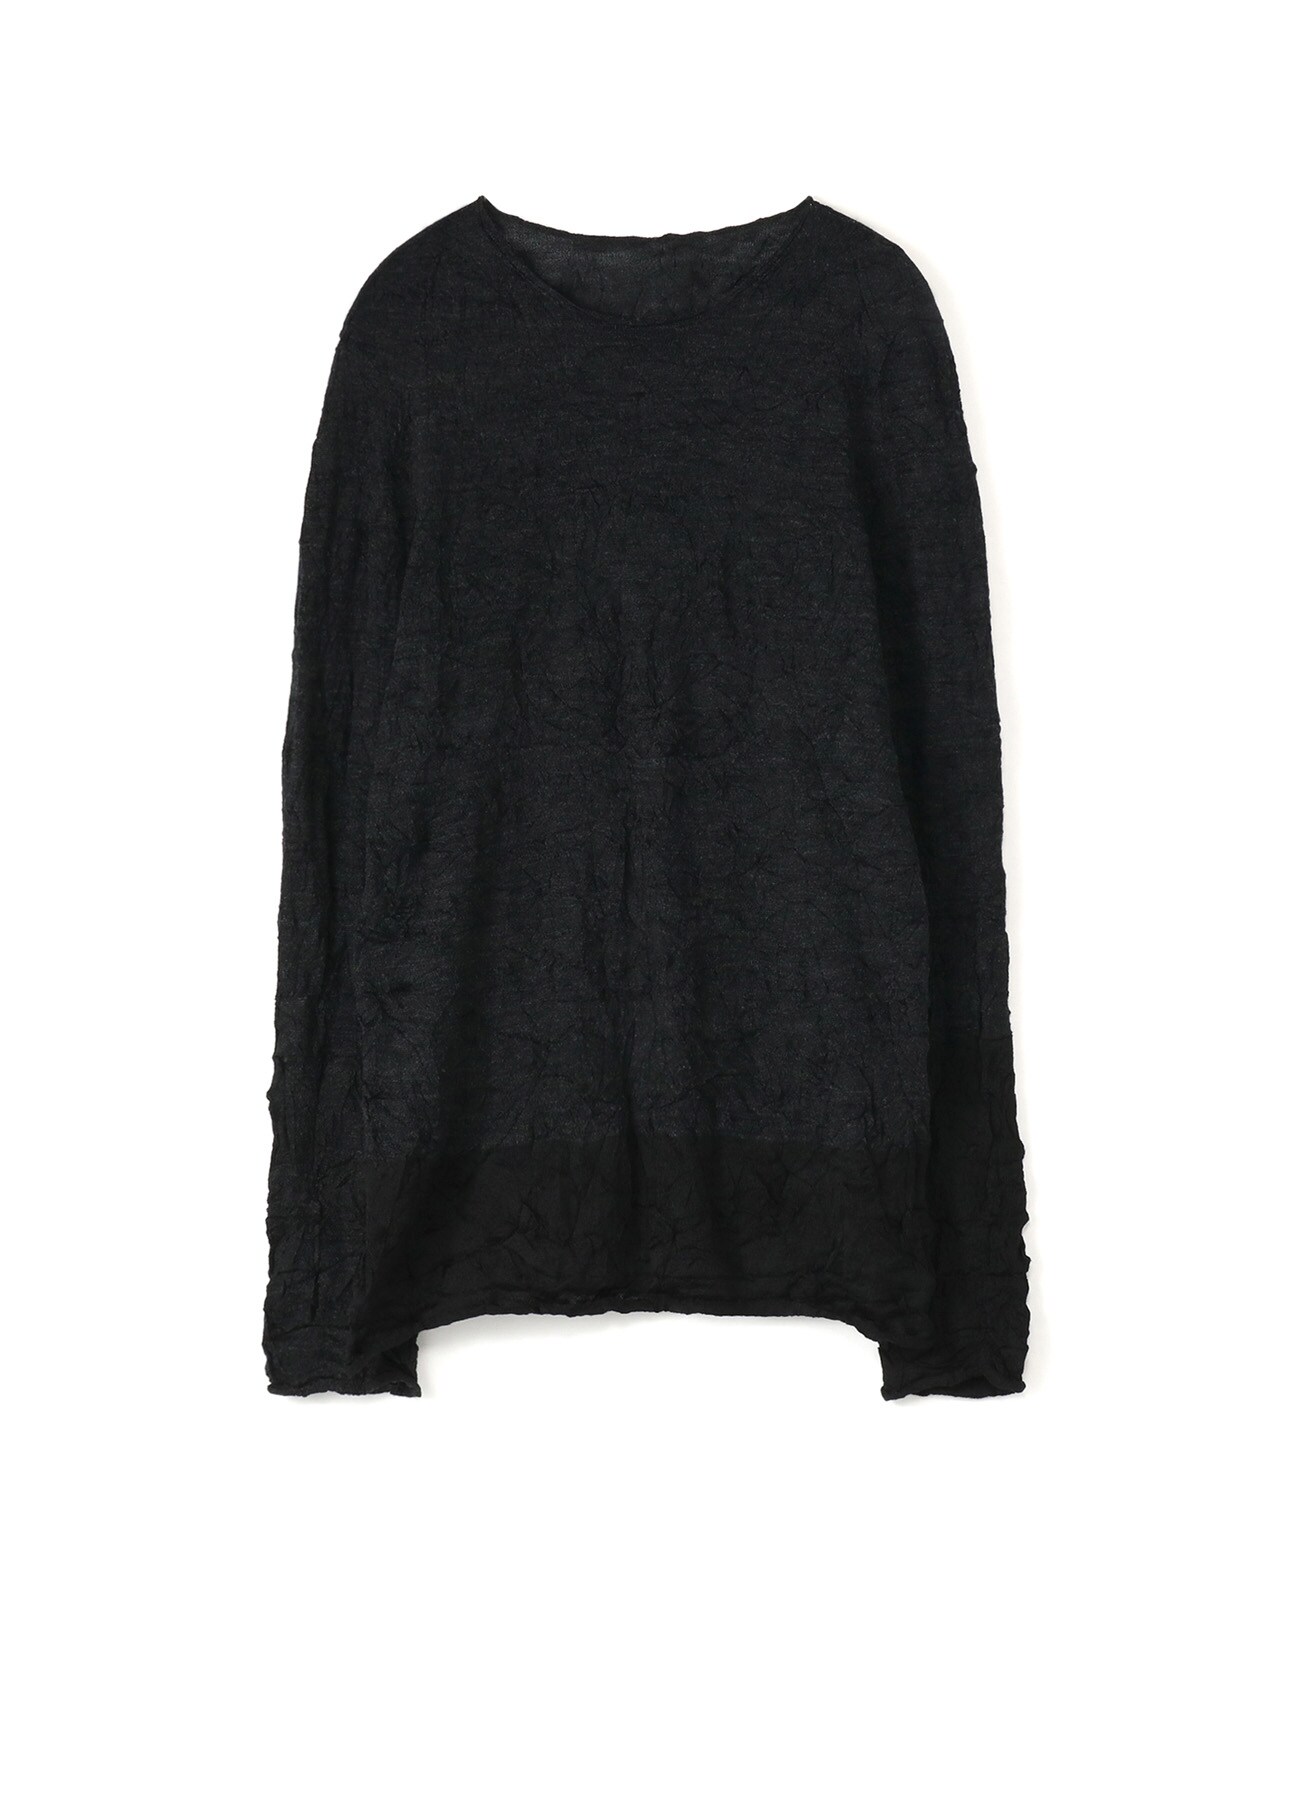 LINKS WRINKLE ROUND NECK LONG SLEEVE PULLOVER